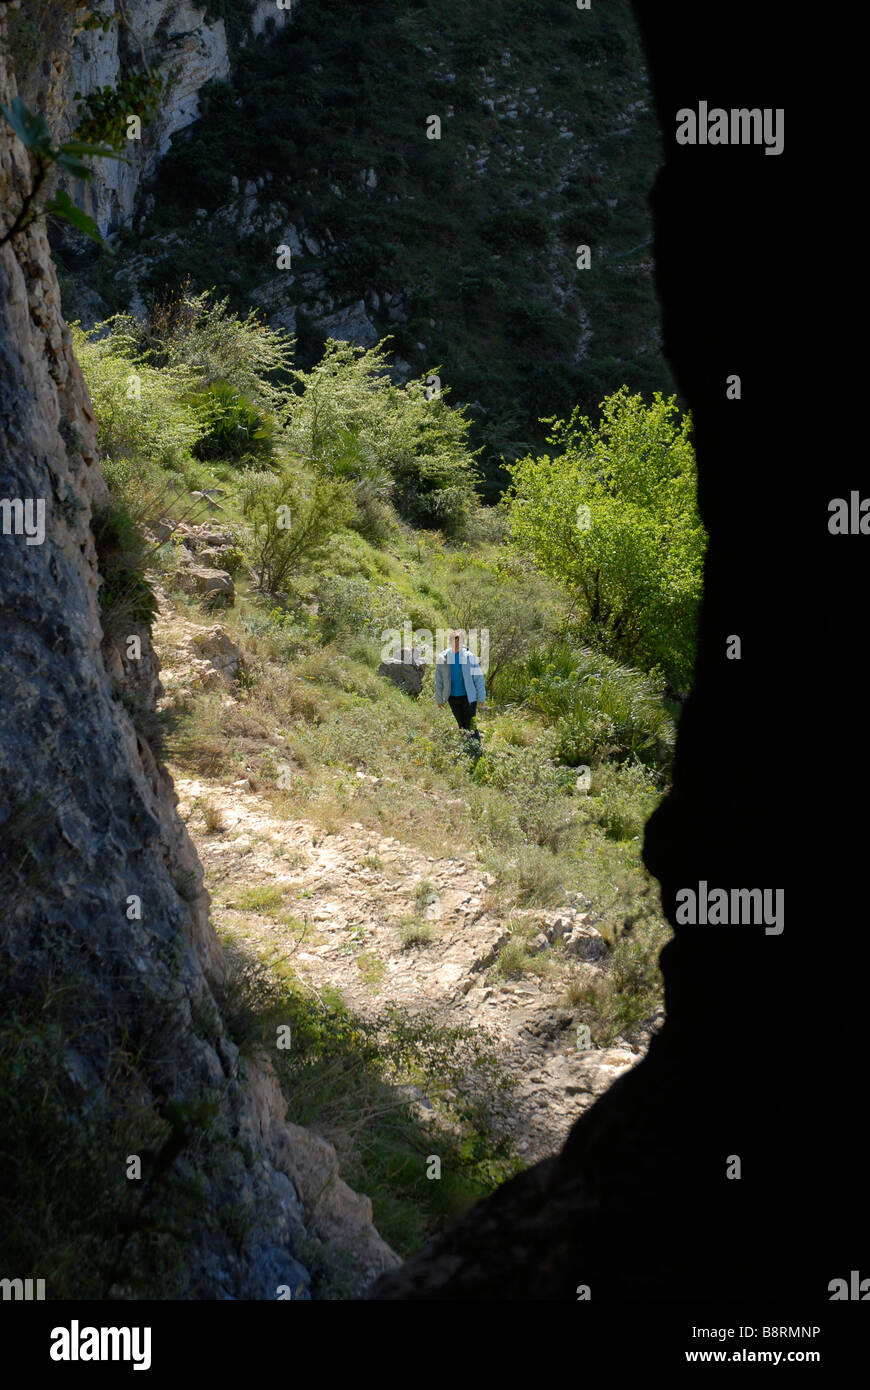 looking out of a cave to a woman walking past, Vall de Laguart, Benimaurell, Alicante Province, Comunidad Valenciana, Spain Stock Photo